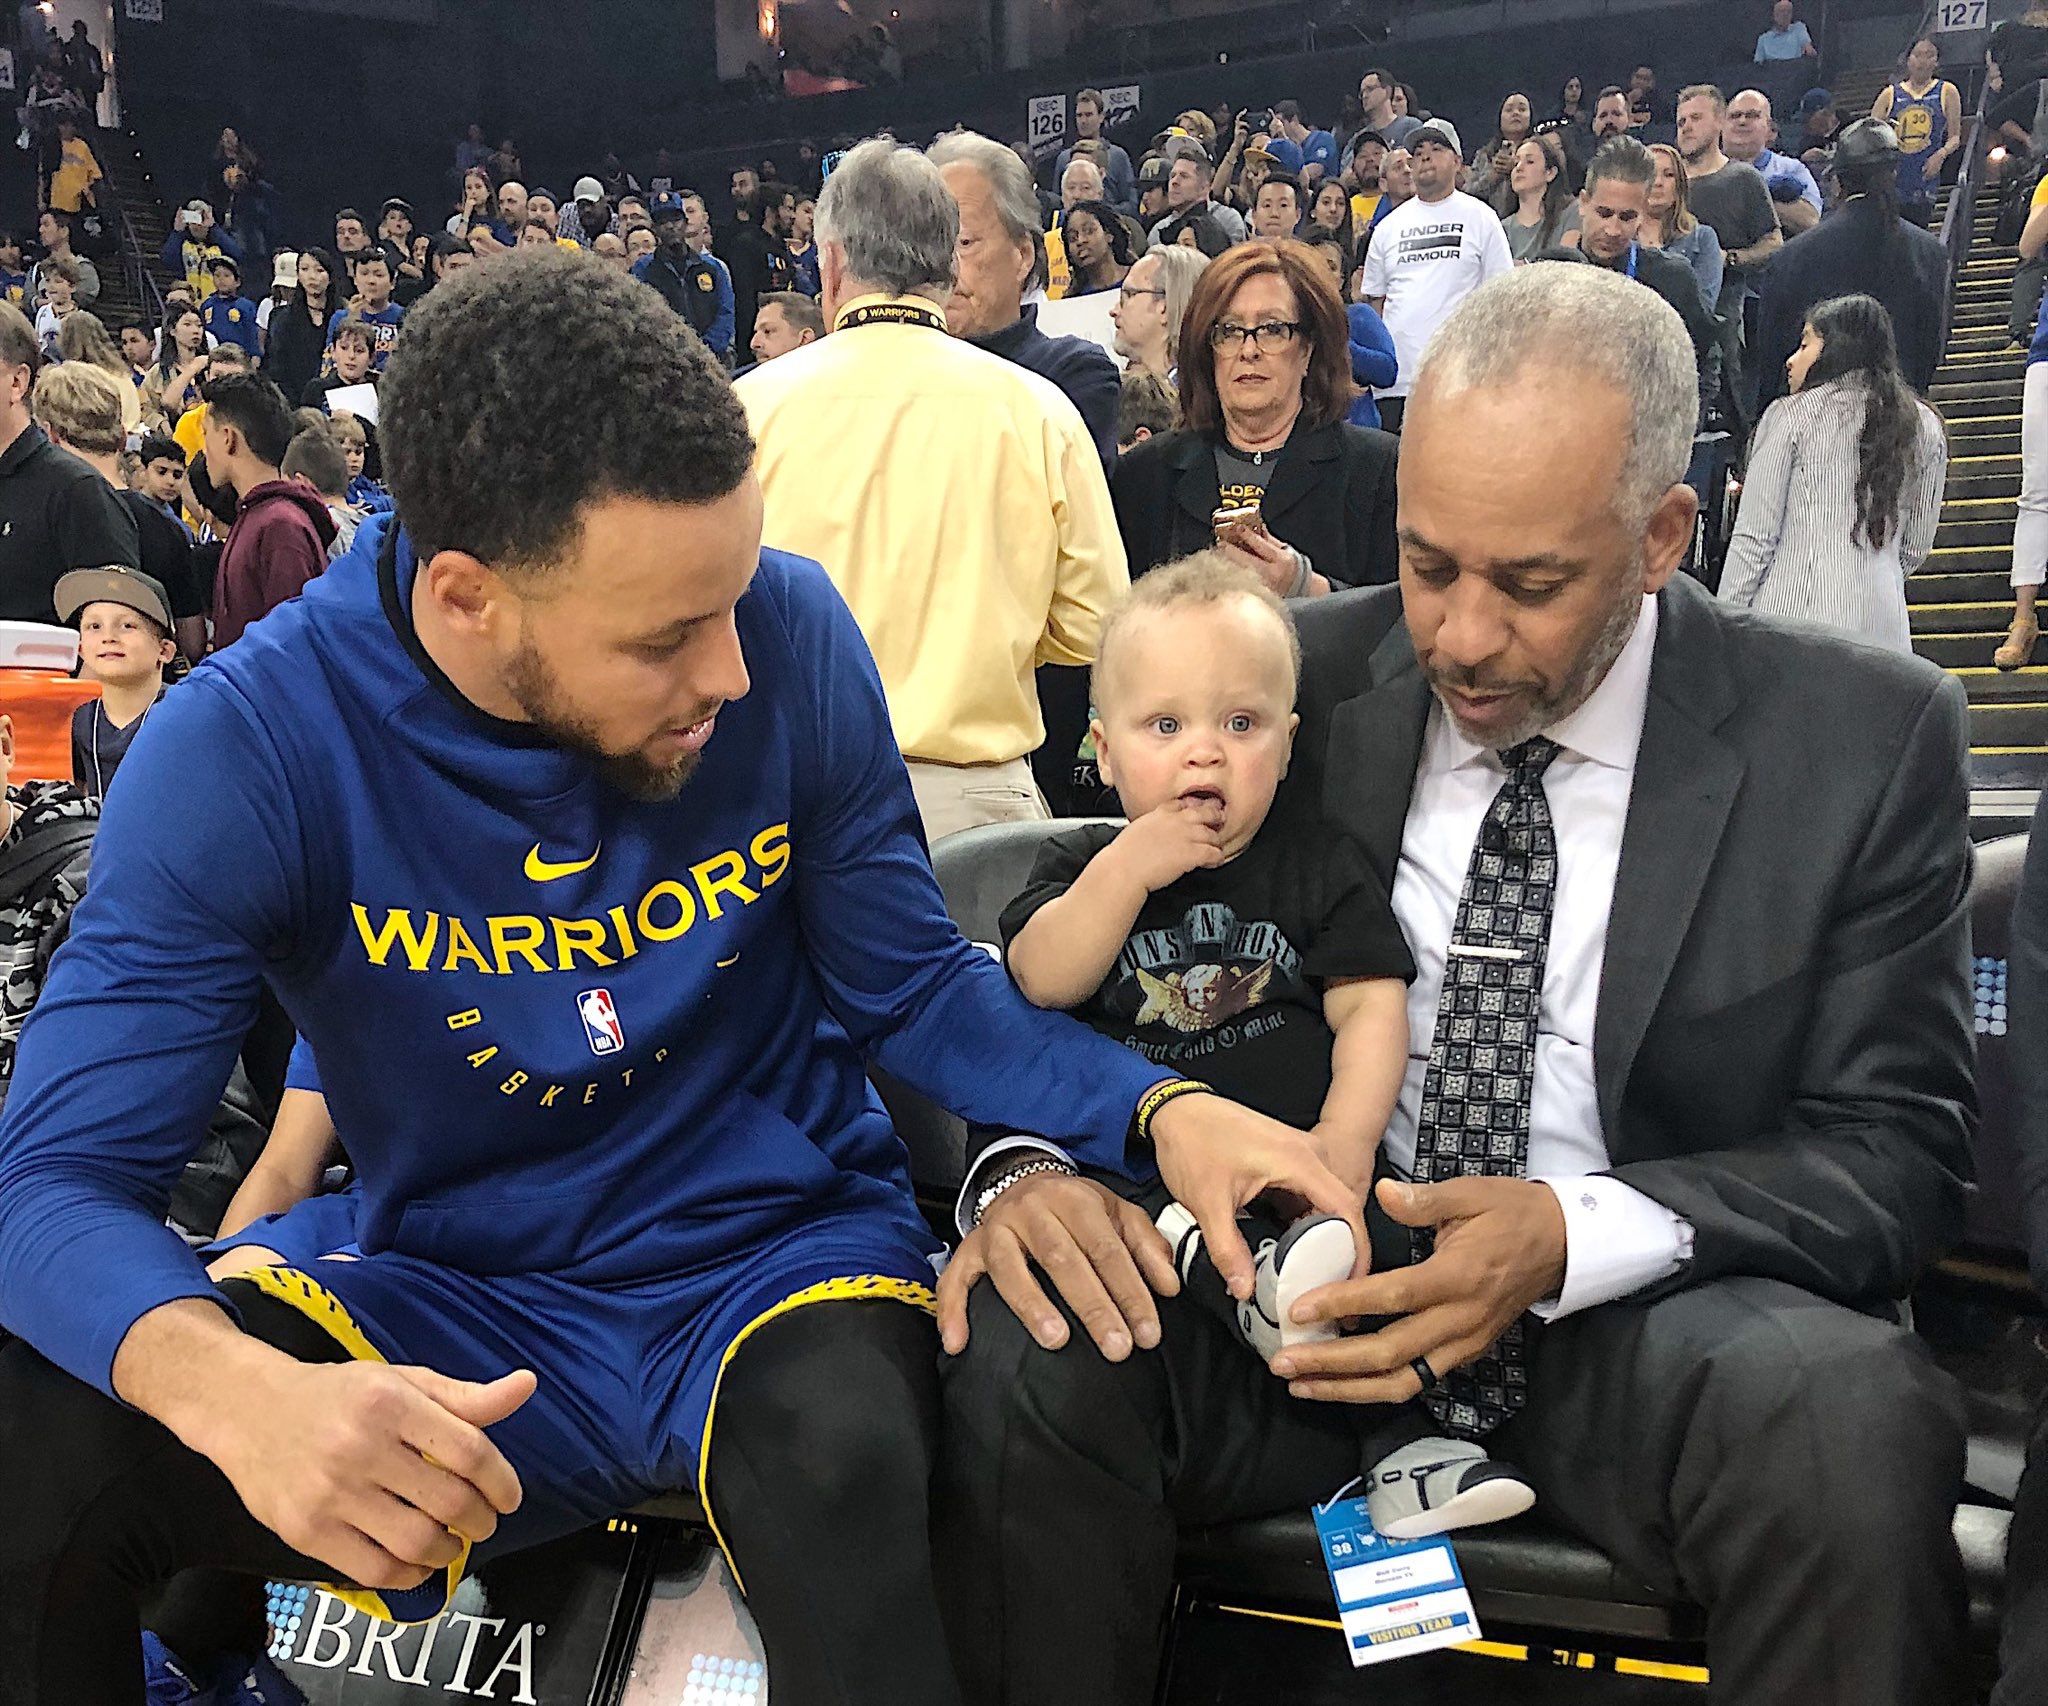 likhoa he definitely was going to try and take gary paytons starting spot steph curry on son canon not wanting to leave the court during nuggets vs warriors 651bbc357c7ad "he Definitely Was Going To Try And Take Gary Payton’s Starting Spot" - Steph Curry On Son Canon Not Wanting To Leave The Court During Nuggets Vs Warriors